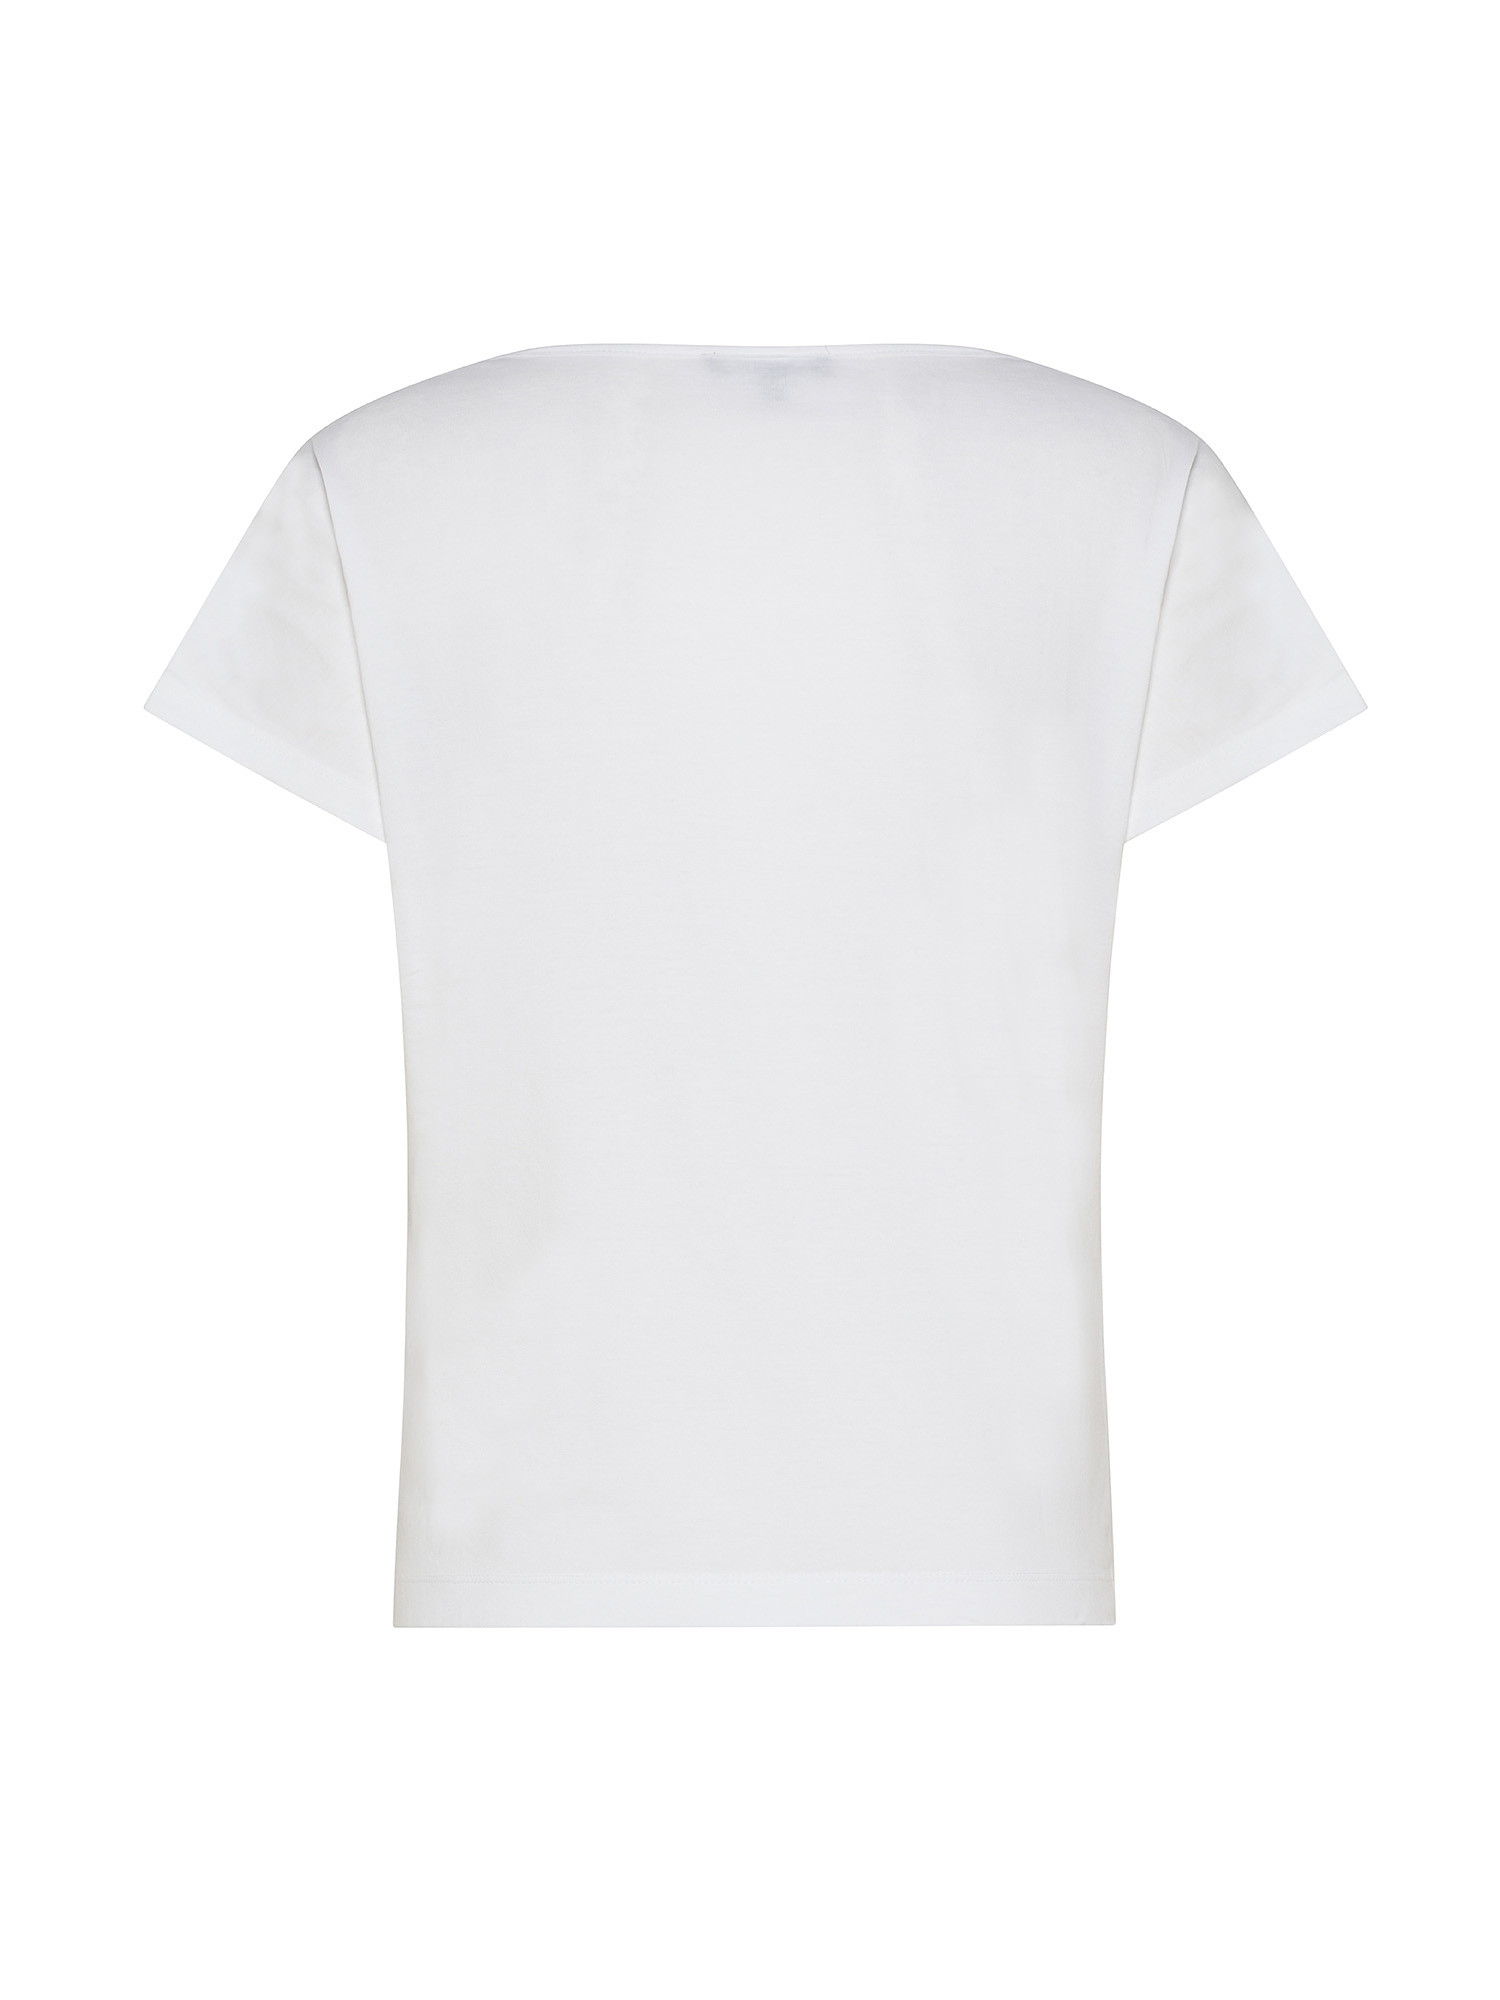 Koan - T-shirt with embroidery, White, large image number 1